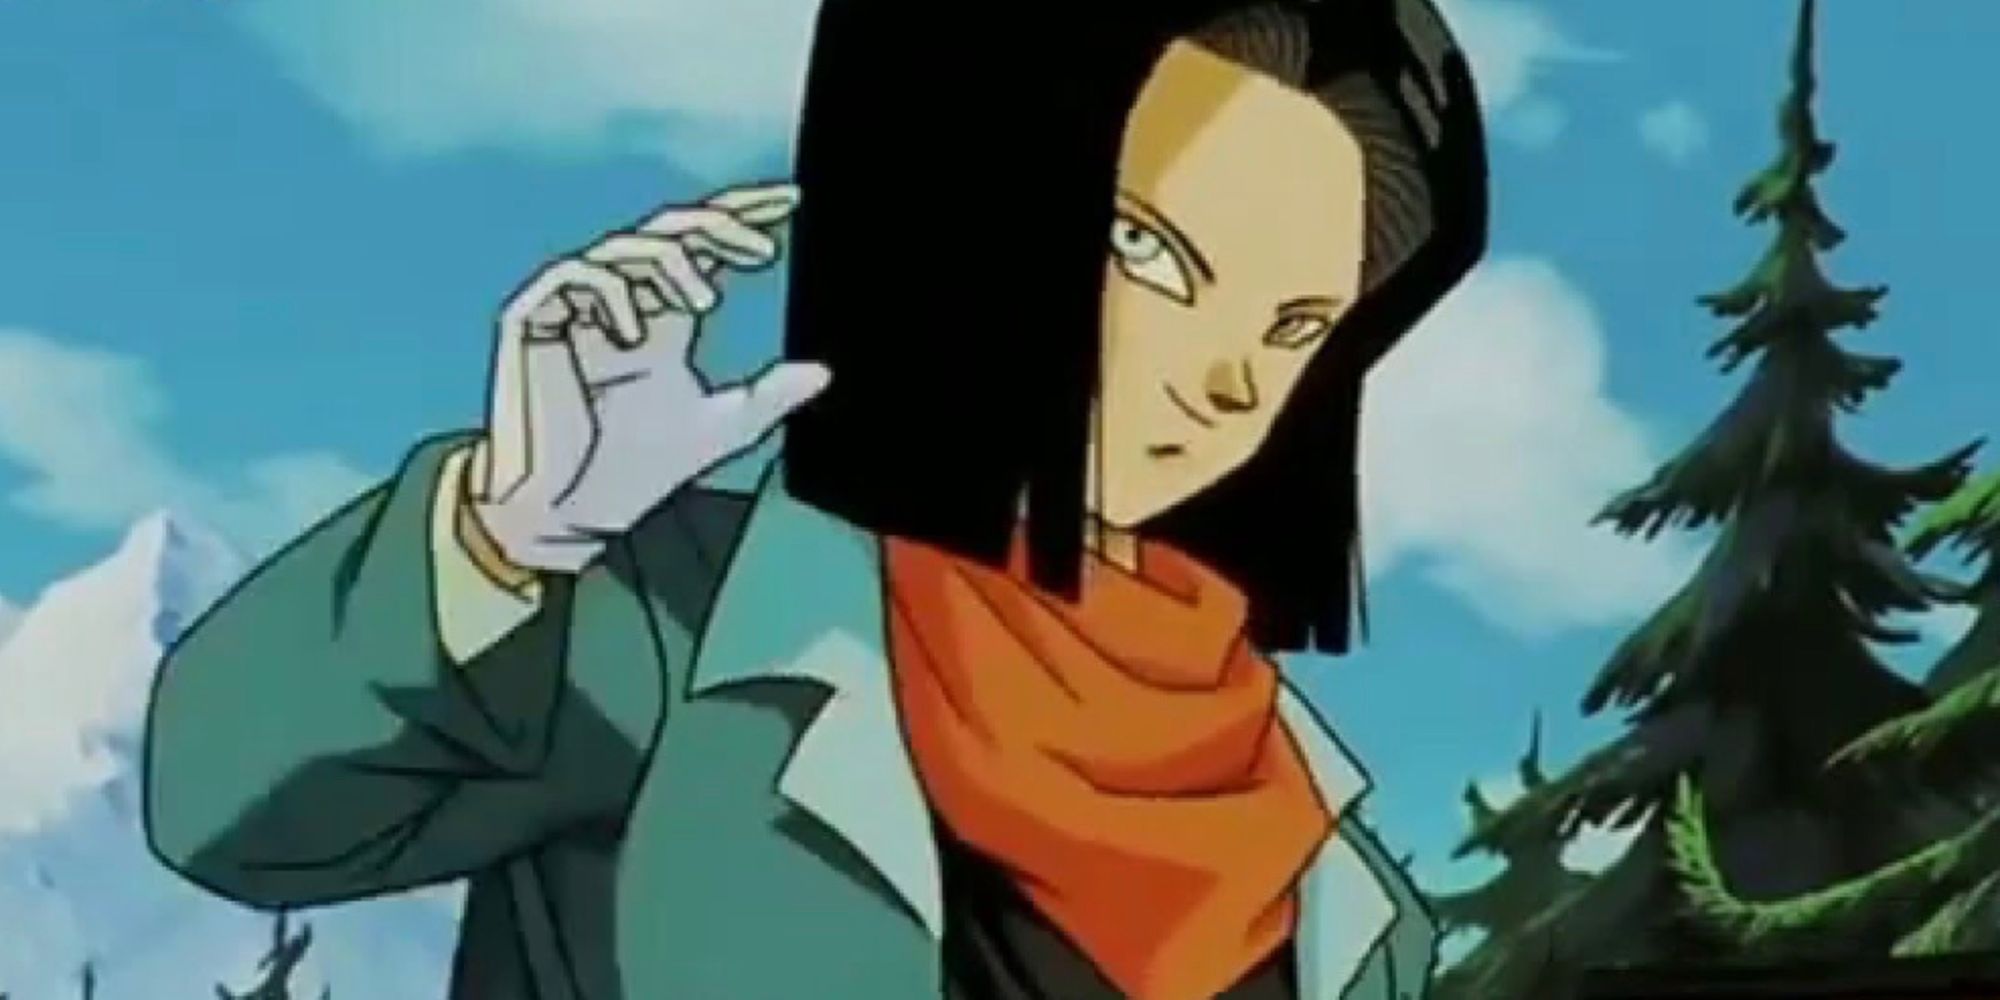 Android 17 donates energy to Goku's Super Spirit Bomb in Dragon Ball Z